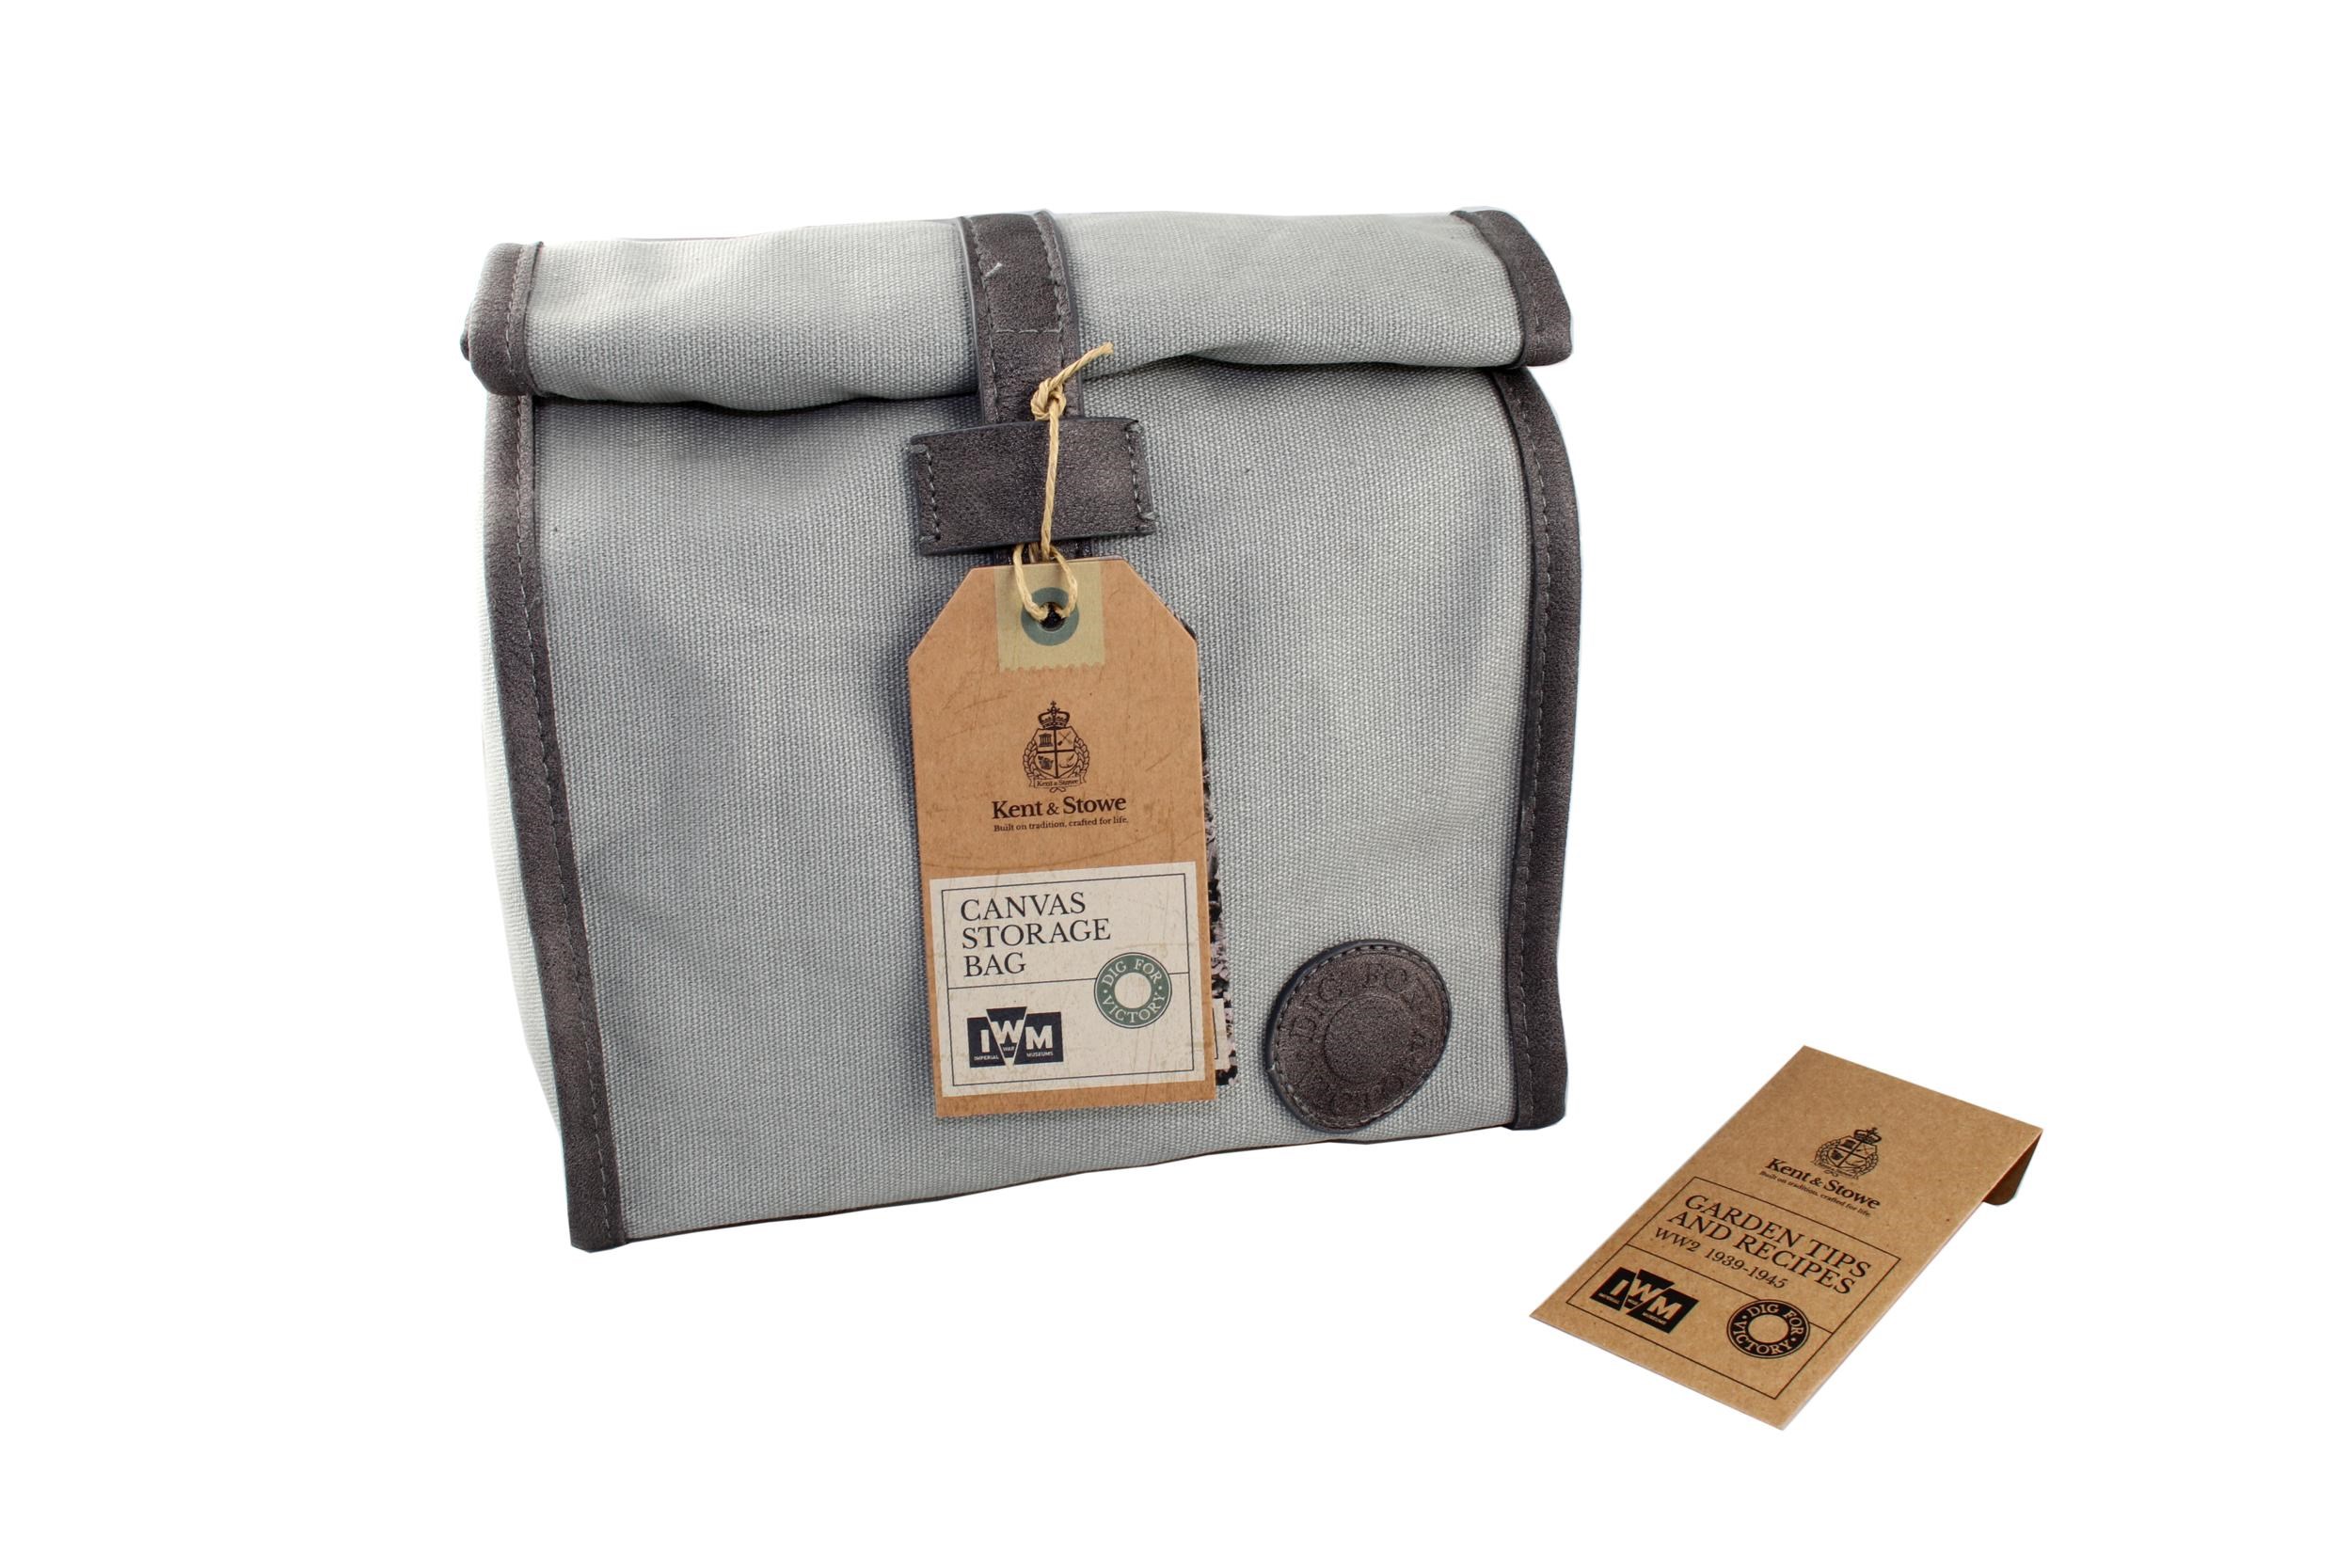 29 cm Dig For Victory Roll Down Storage Bag by Kent & Stowe